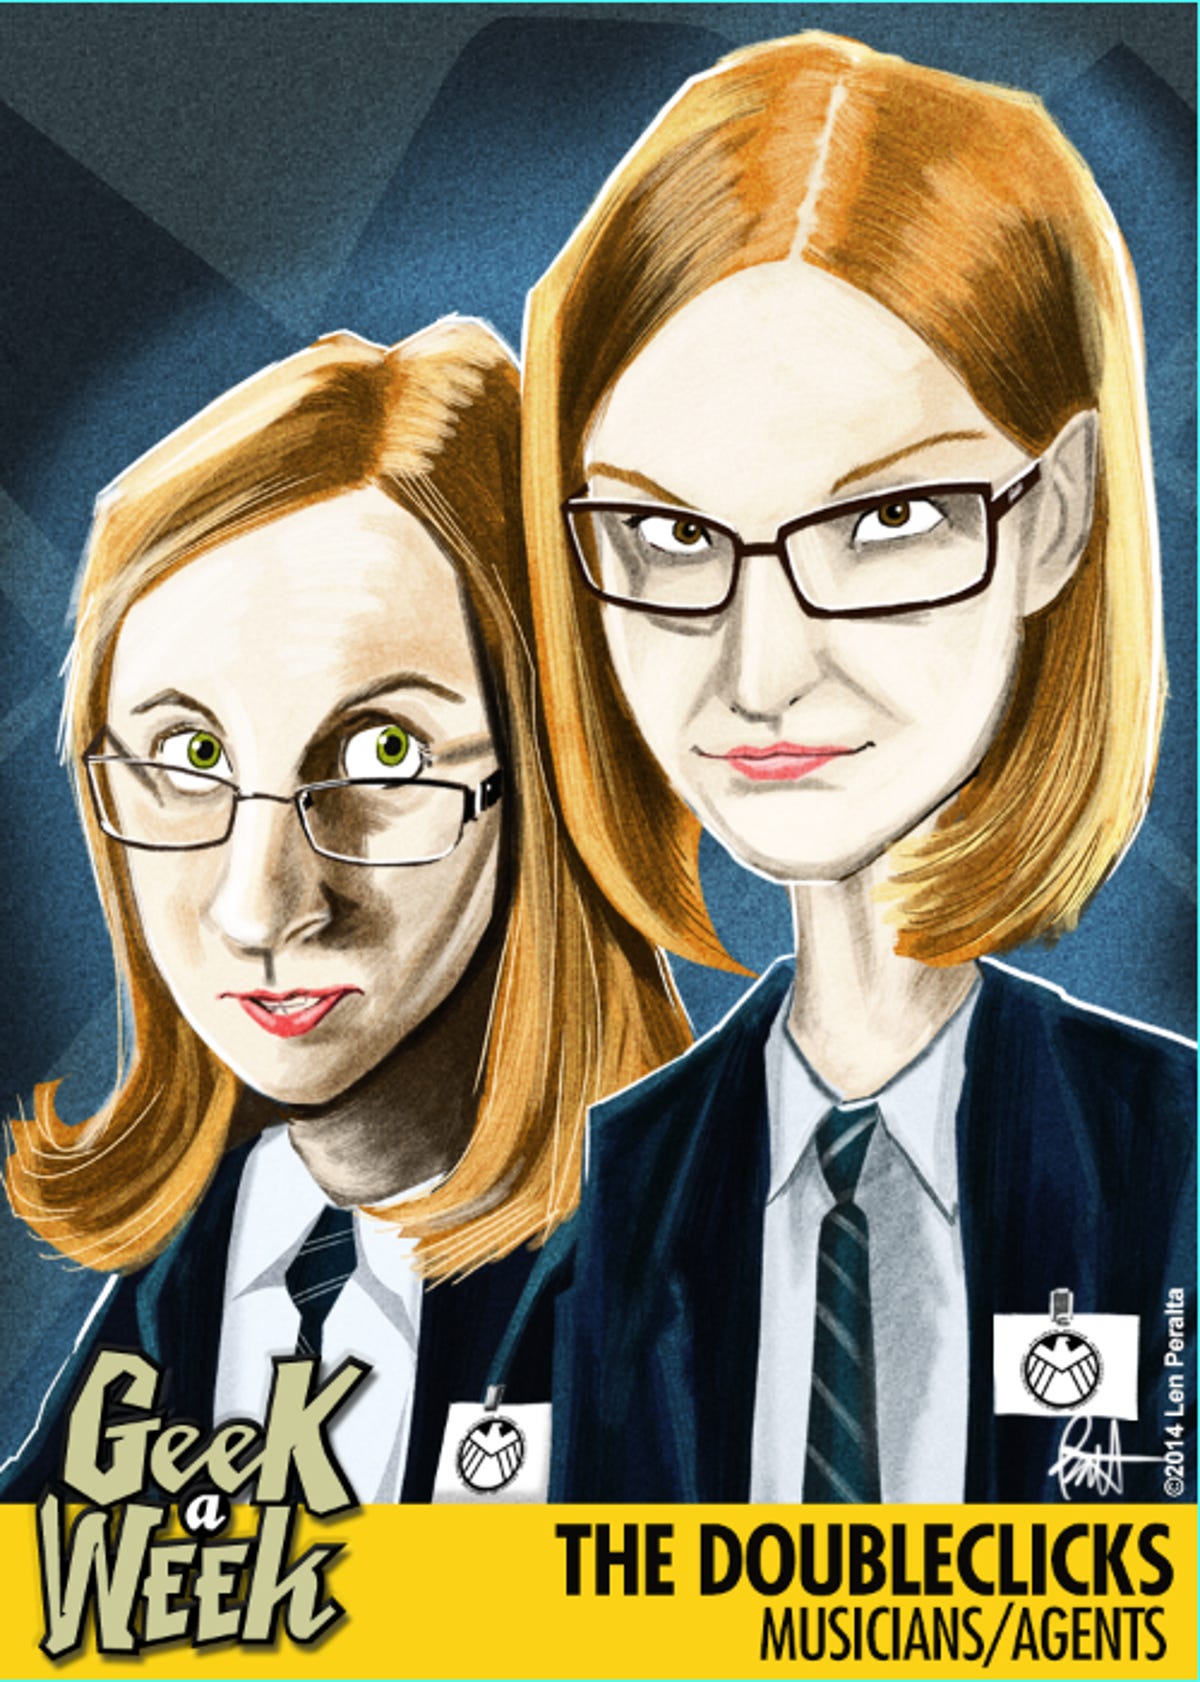 Portland-based sister duo, The Doubleclicks, who are known for their geek power ballads, make for the perfect portrait in the new Geek-A-Week card set.